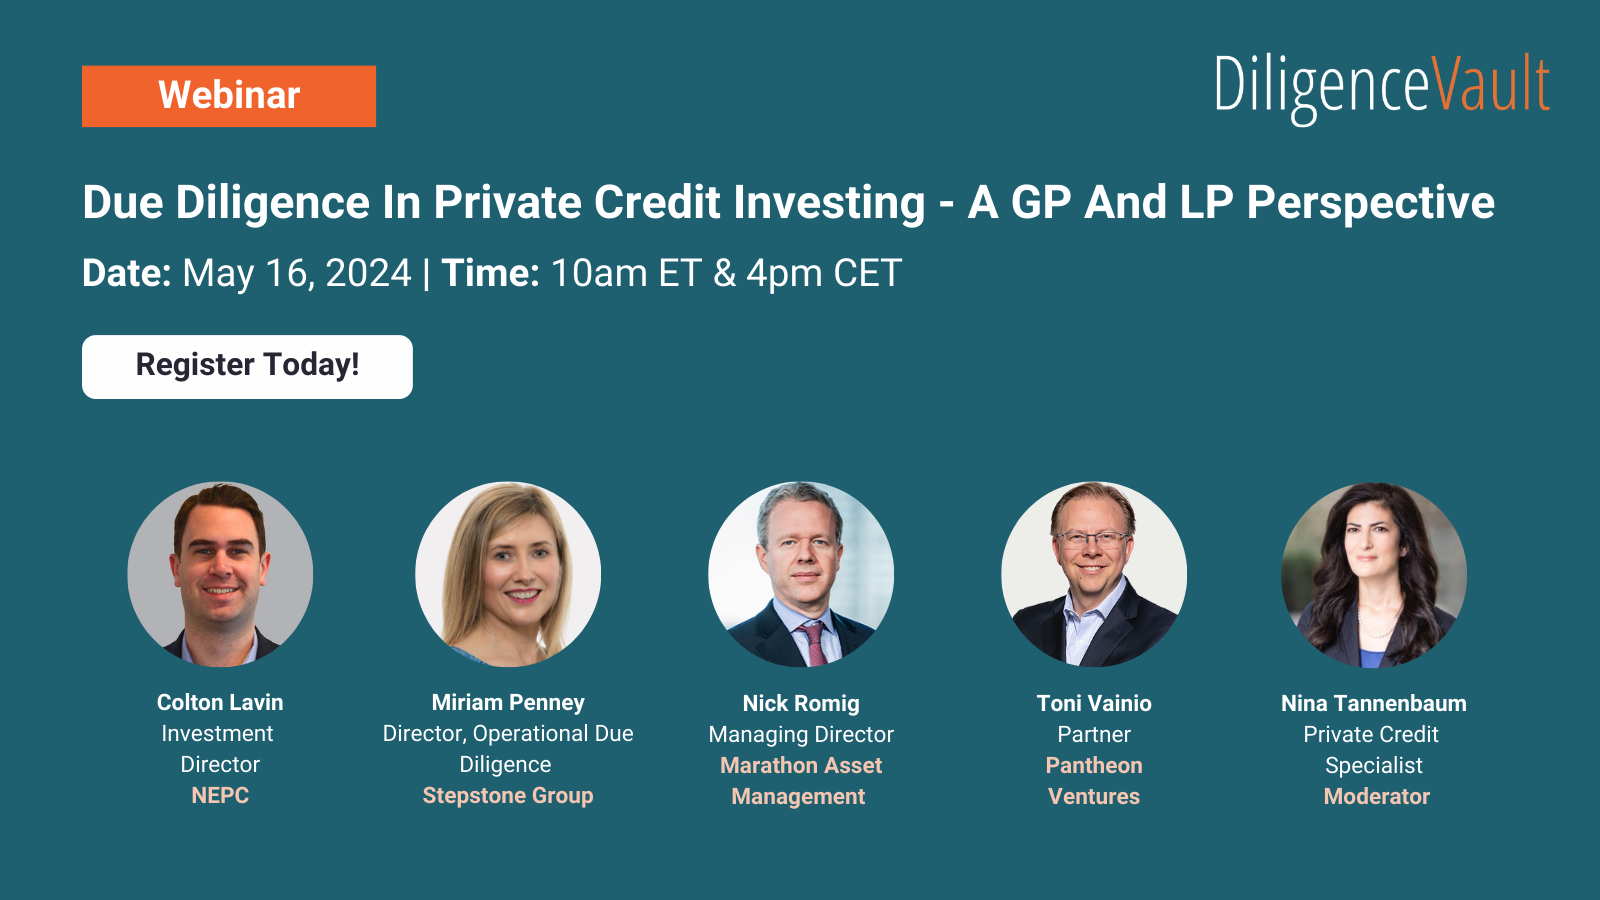 Webinar: Due Diligence In Private Credit Investing